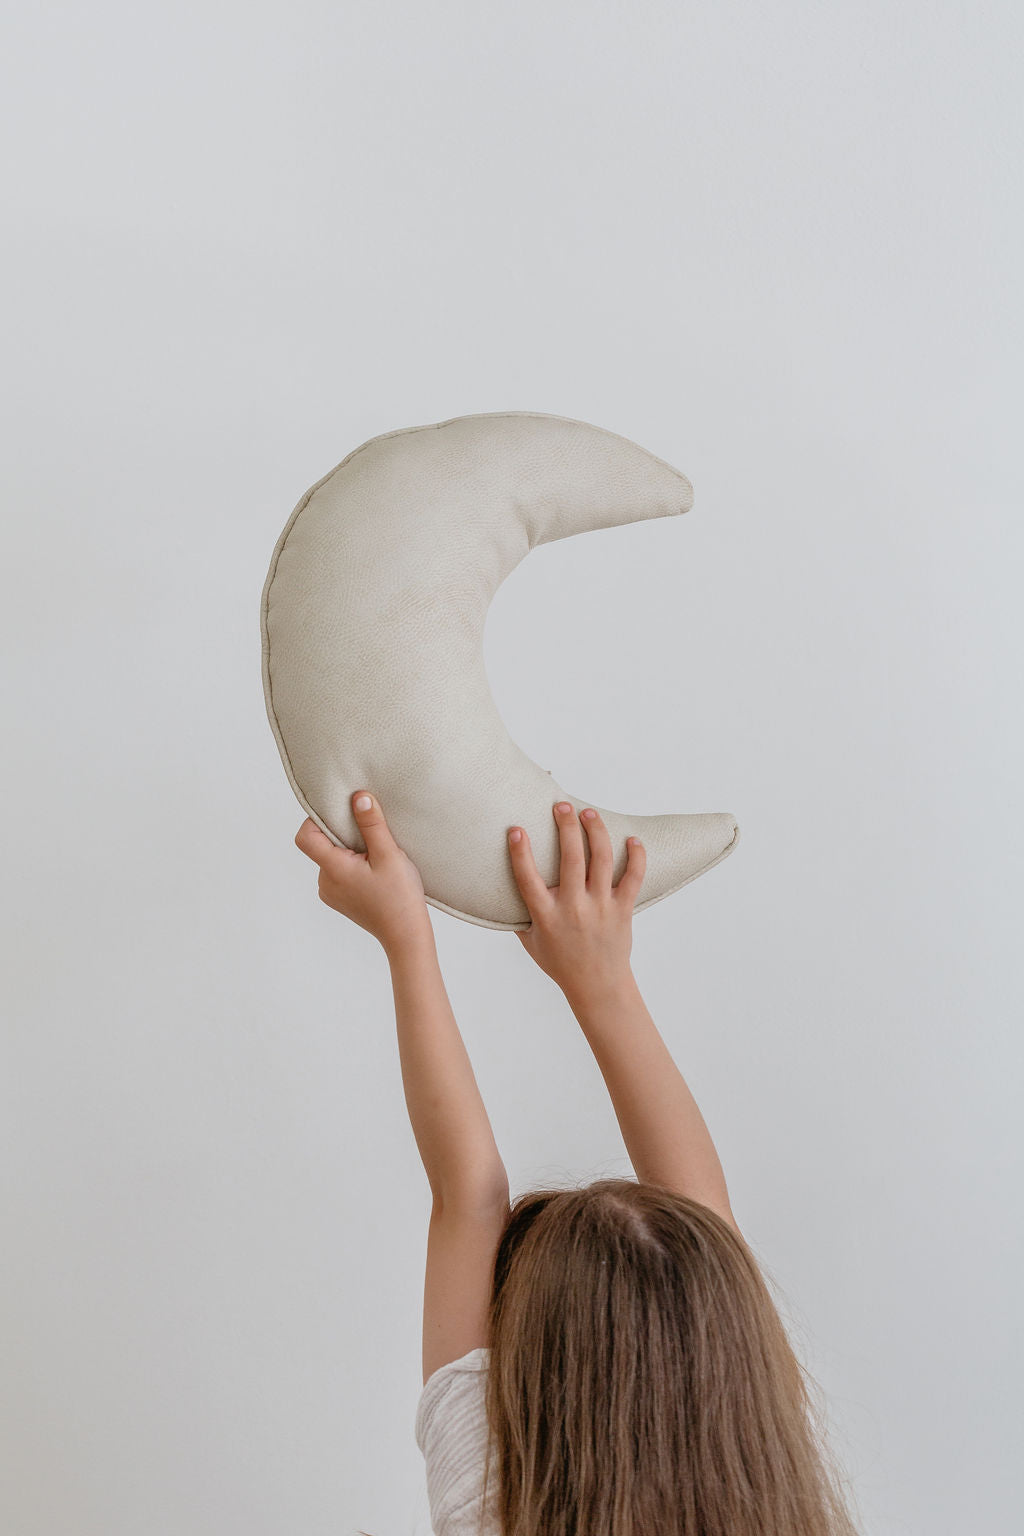 SECONDS SALE - Imperfect Moon Cushion